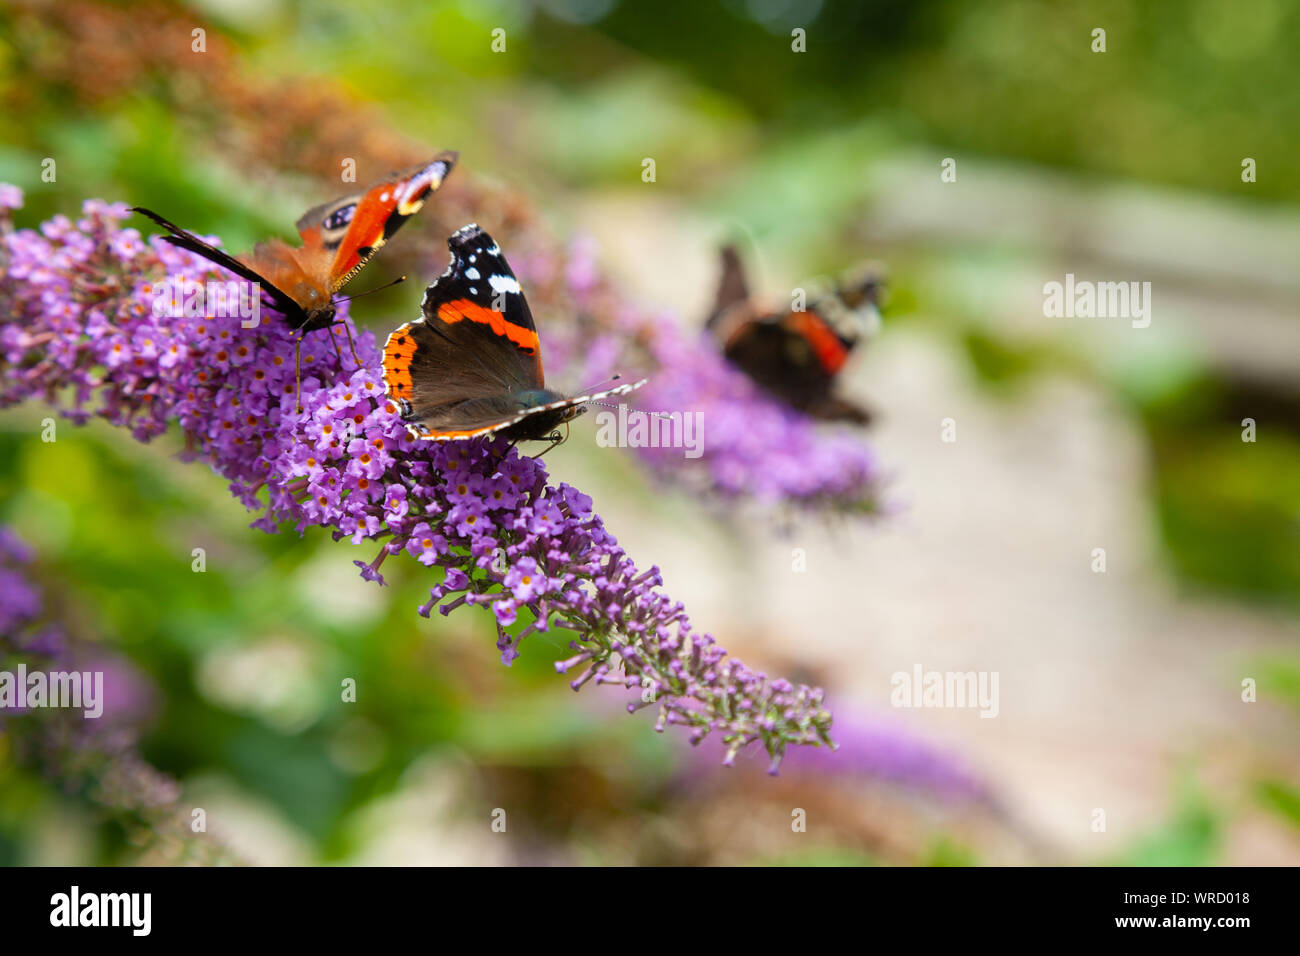 Peacock and Red admiral butterflies on butterfly bush Stock Photo